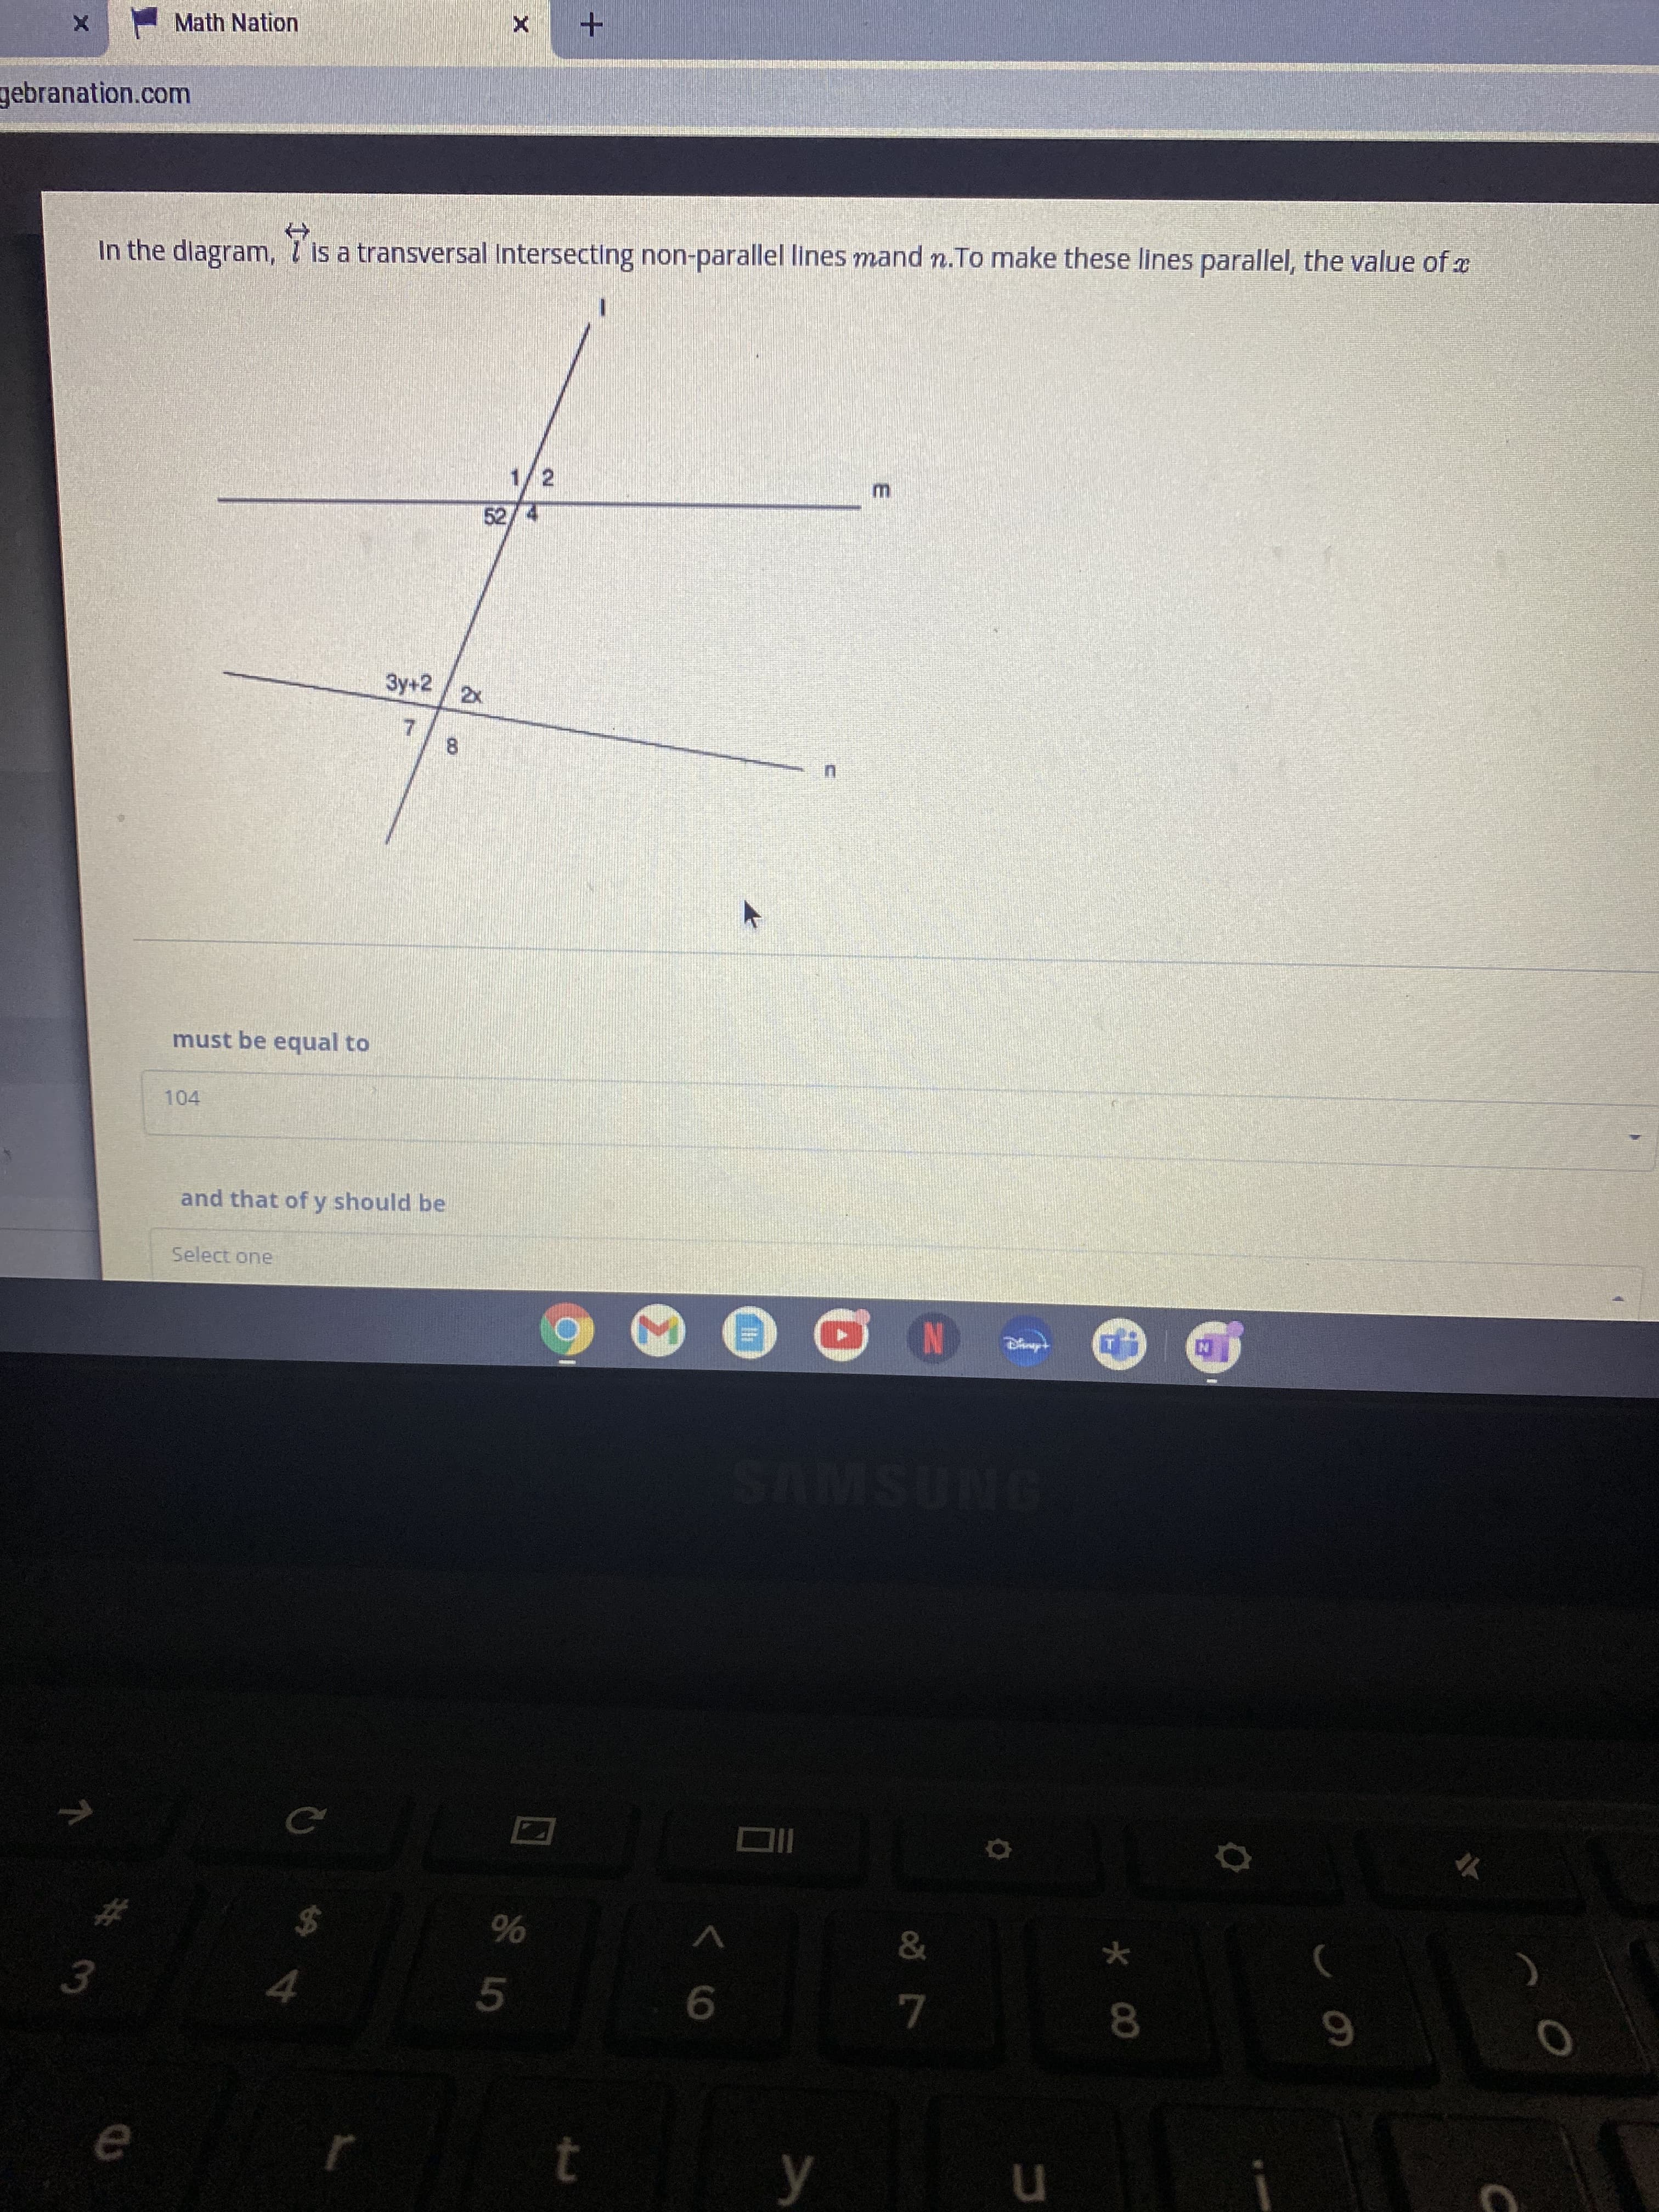 3.
* 00
Math Nation
gebranation.com
In the dlagram, T is a transversal Intersecting non-parallel lines mand n.To make these lines parallel, the value of x
1/2
52/ 4
3y+2
7.
must be equal to
104
and that of y should be
Select one
ONDSWUS
&
$4
4.
5.
t y
in
